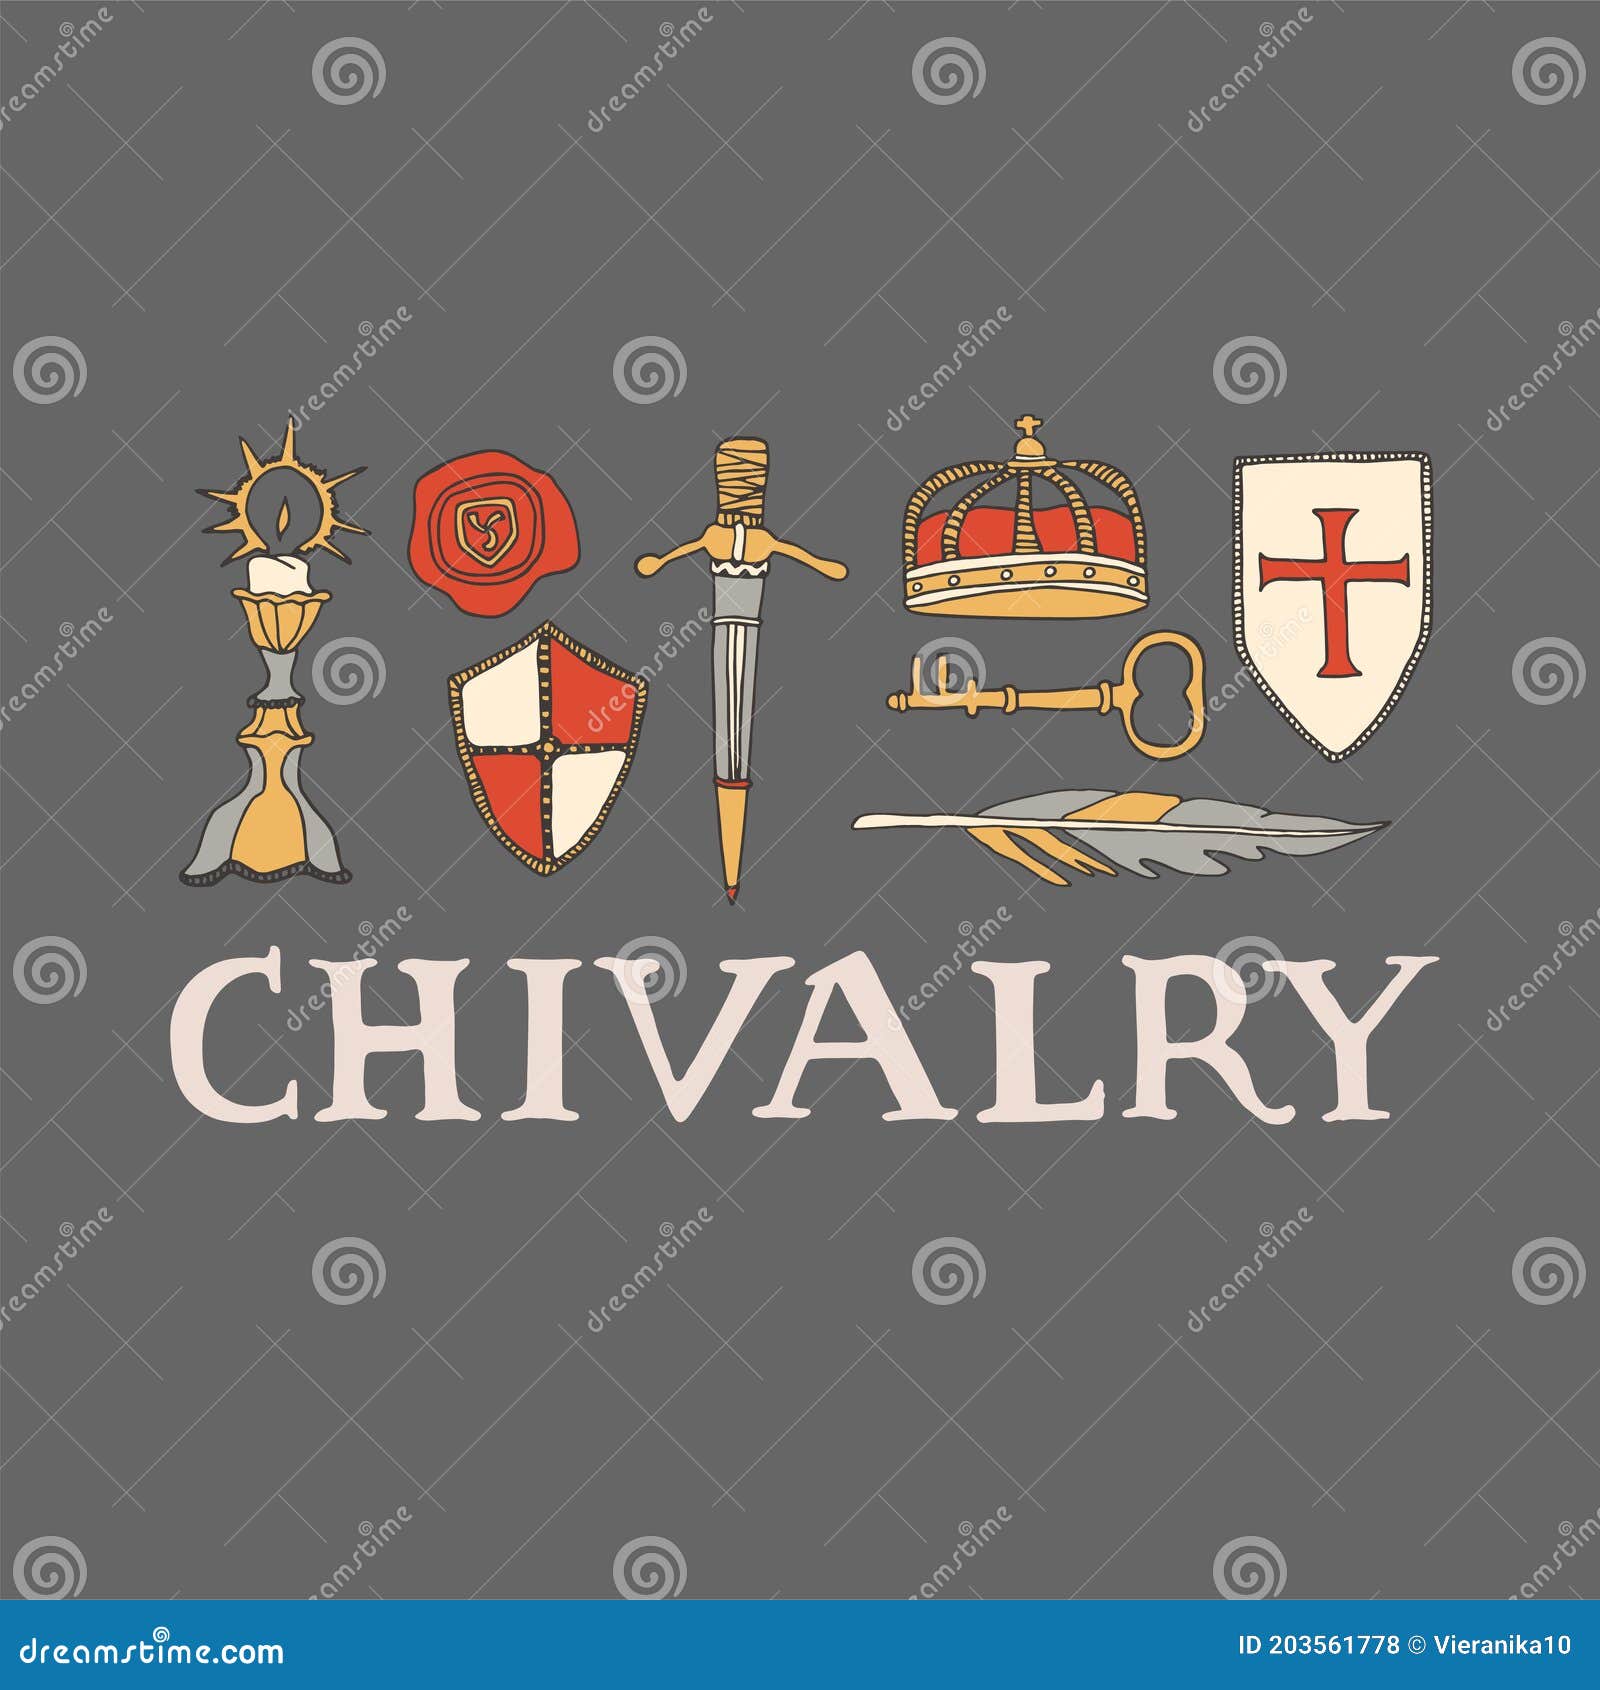 chivalry and crusade concept